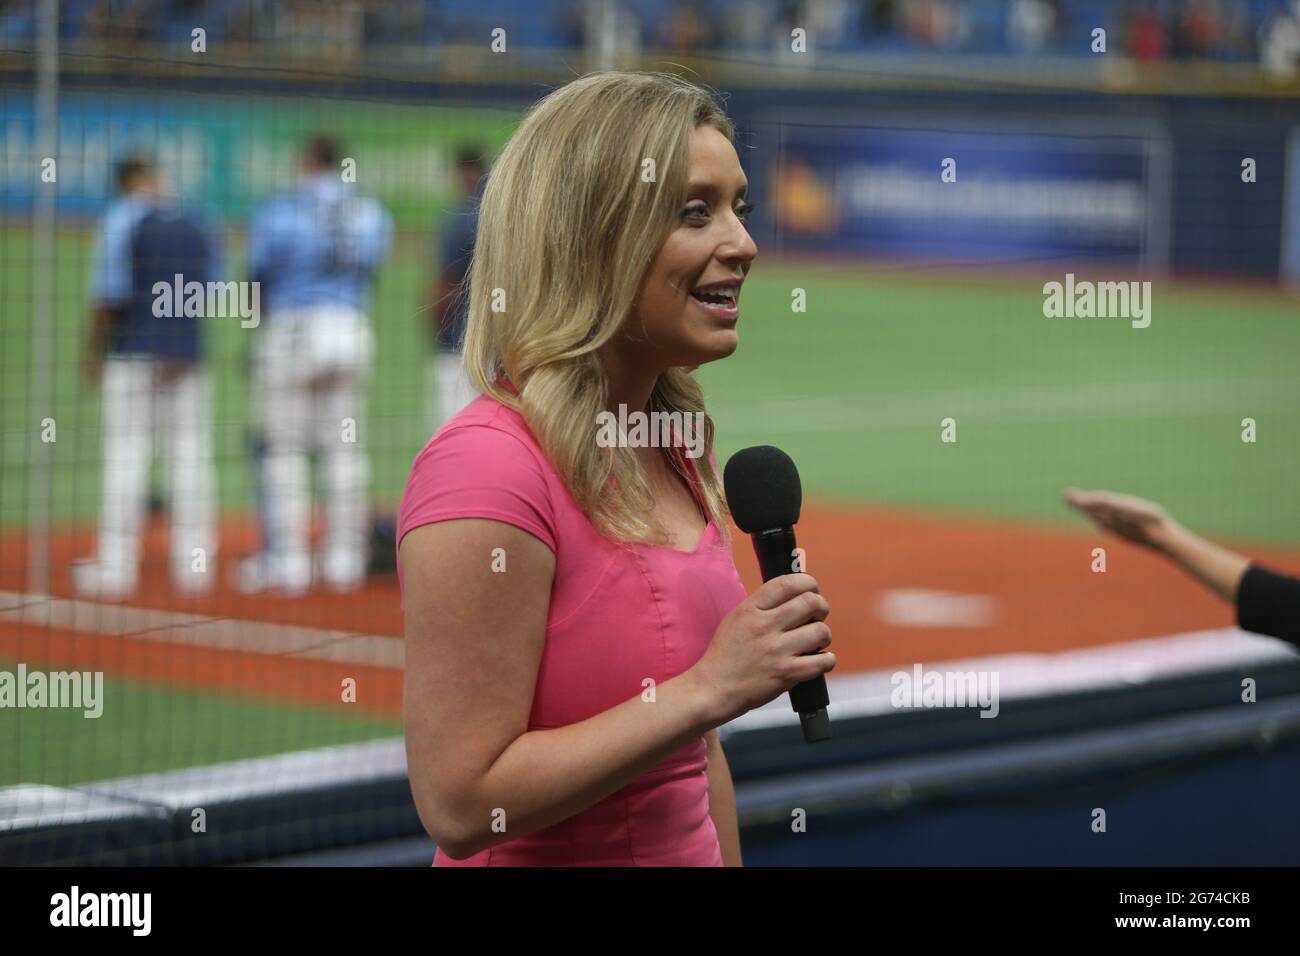 St. Petersburg, FL. USA  Fox Sports broadcaster, Tricia Whitaker, sang both the Canadian and American National Anthems prior to a major league basebal Stock Photo